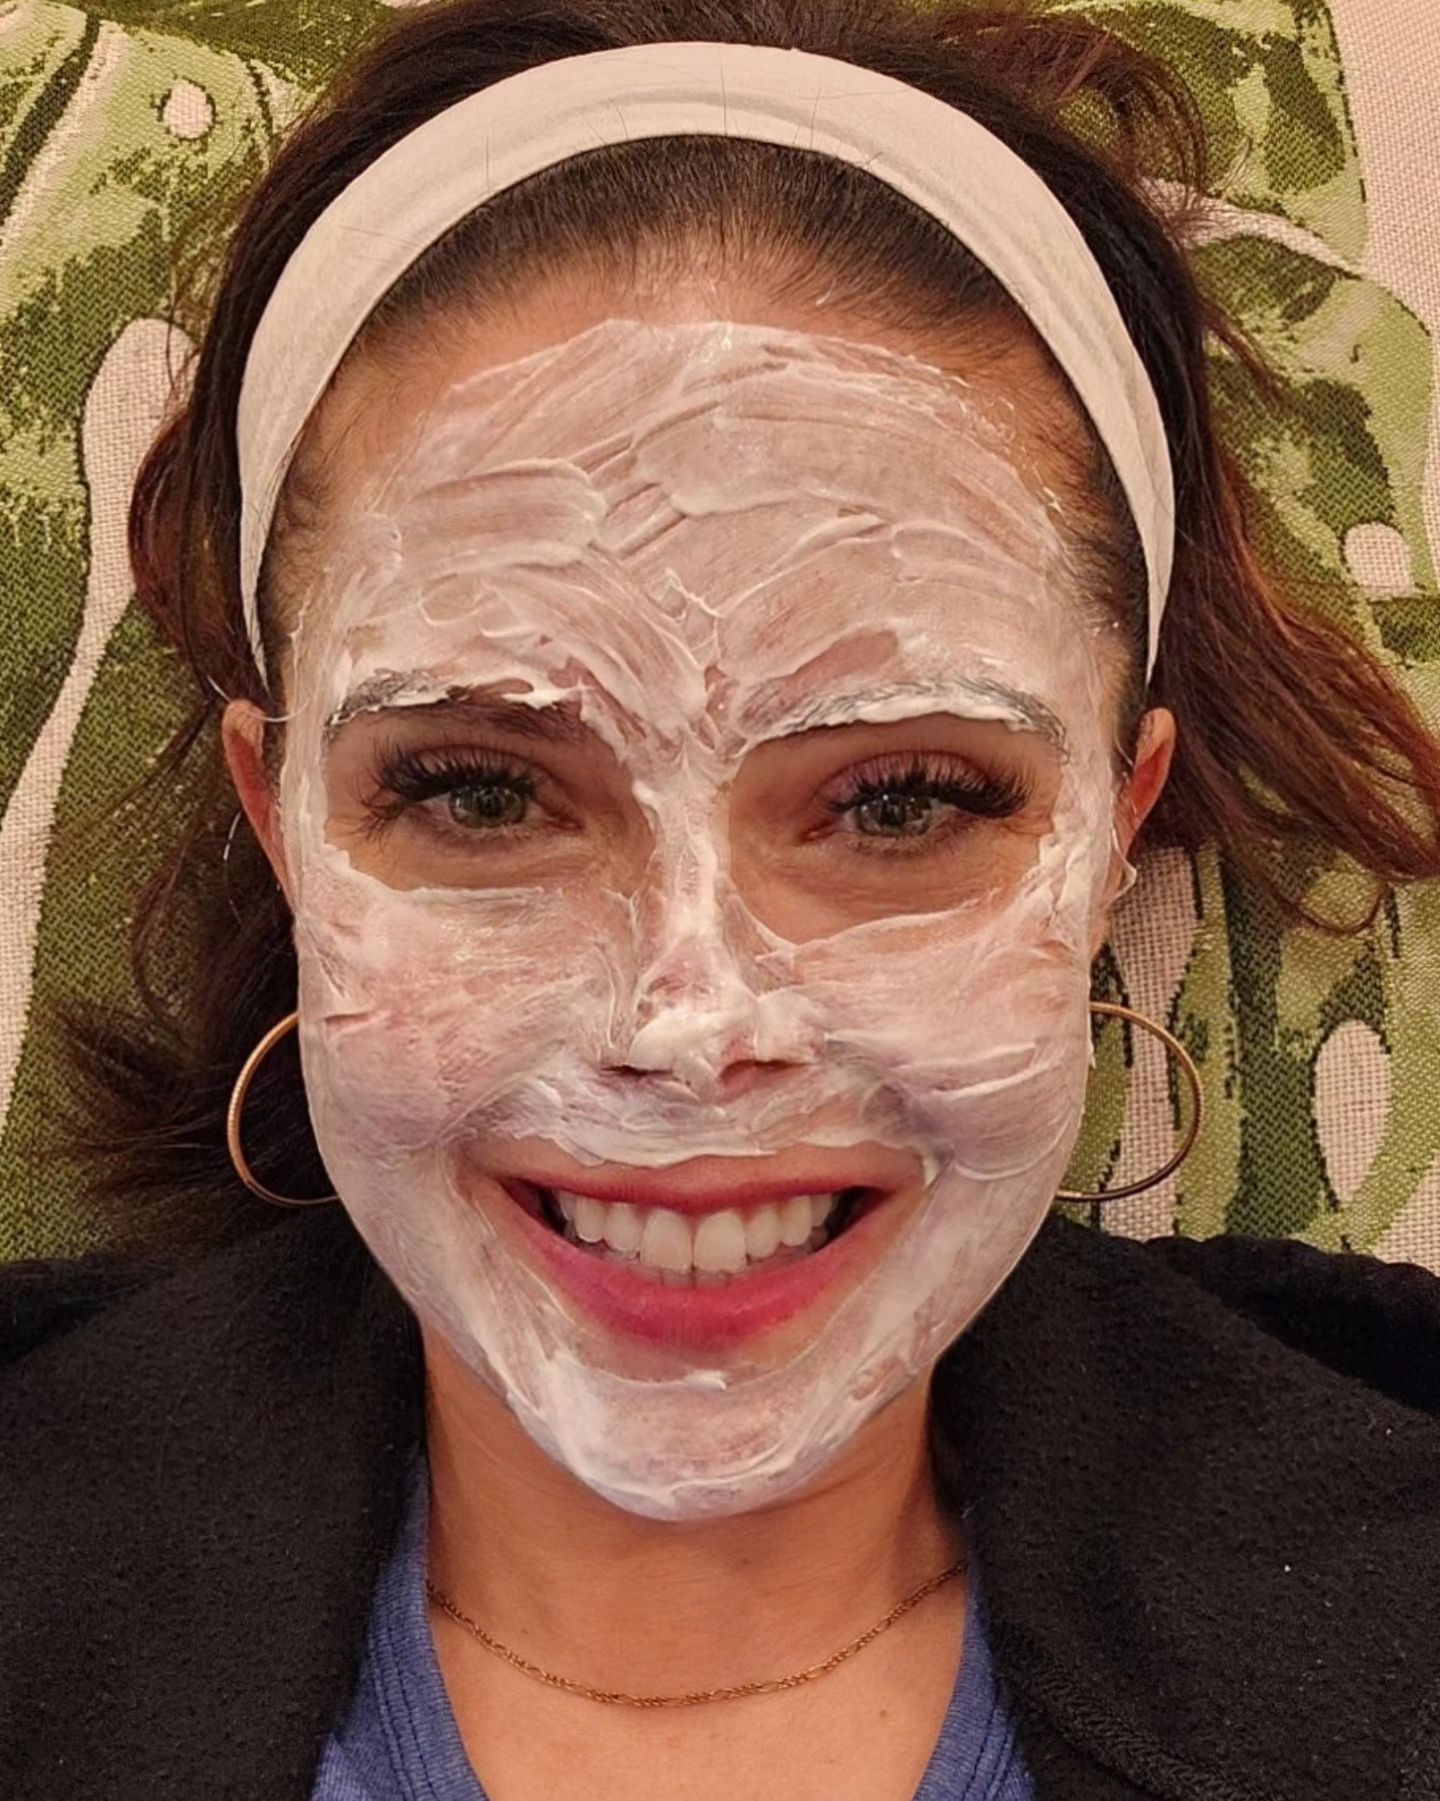 Sometimes you just need to take care of yourself....skincare is super important, especially as we age.